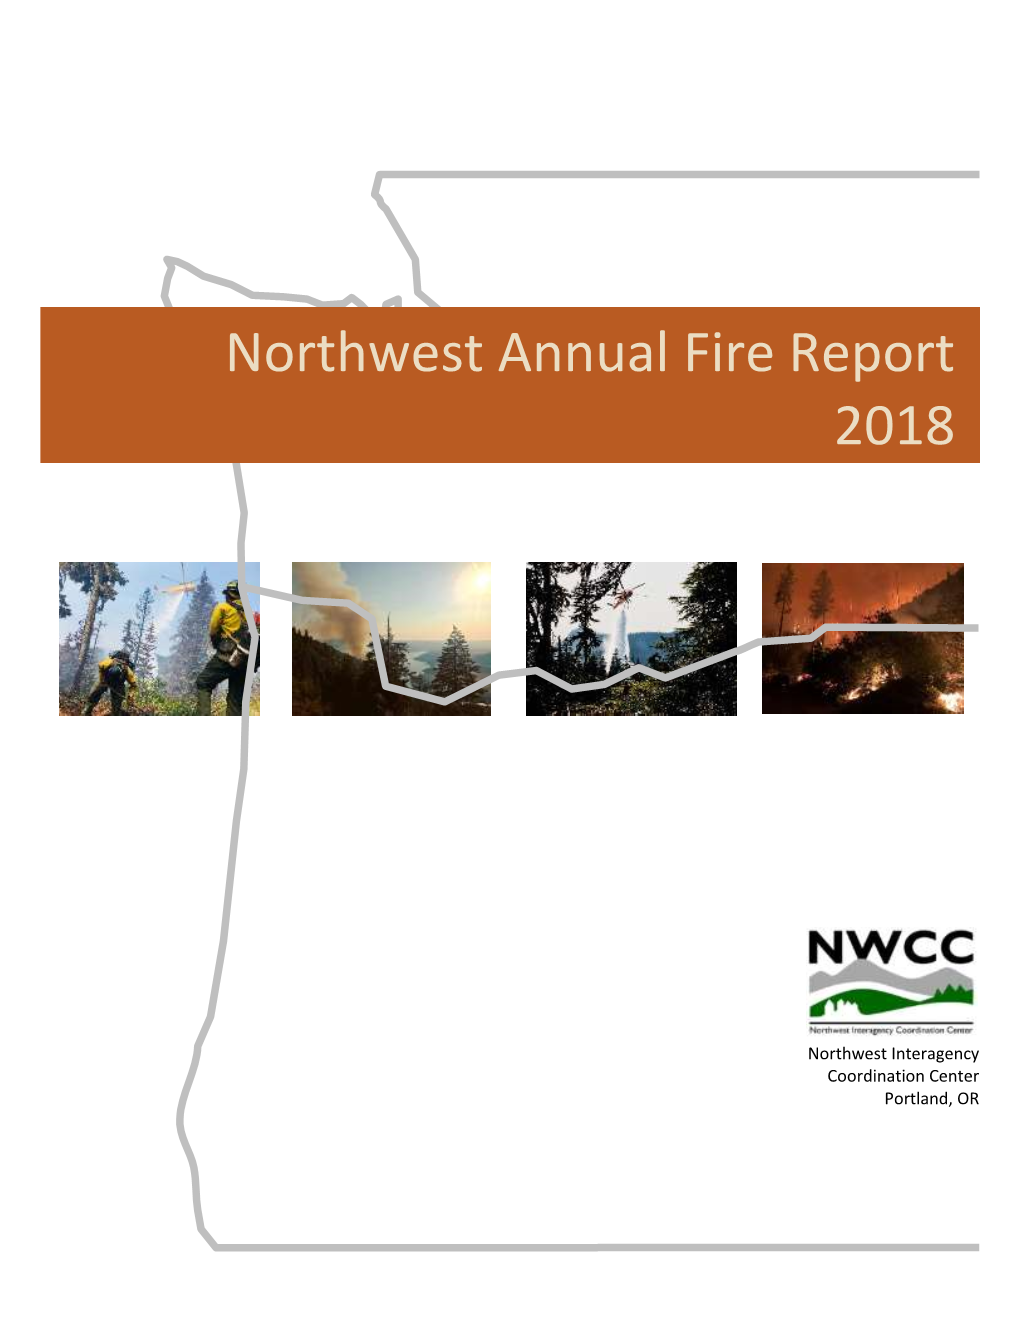 Northwest Annual Fire Report 2018